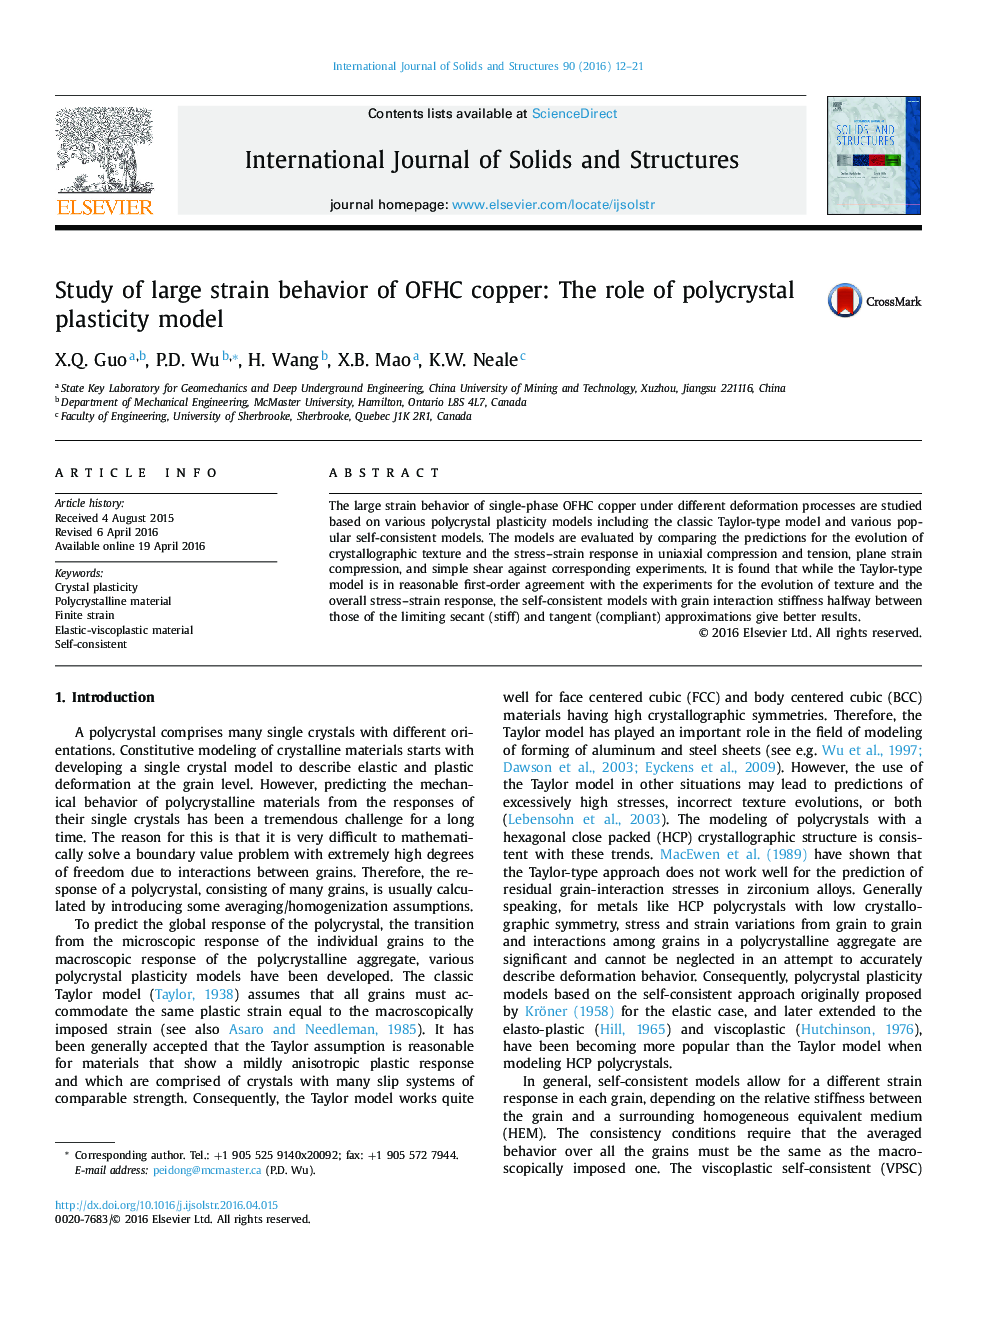 Study of large strain behavior of OFHC copper: The role of polycrystal plasticity model